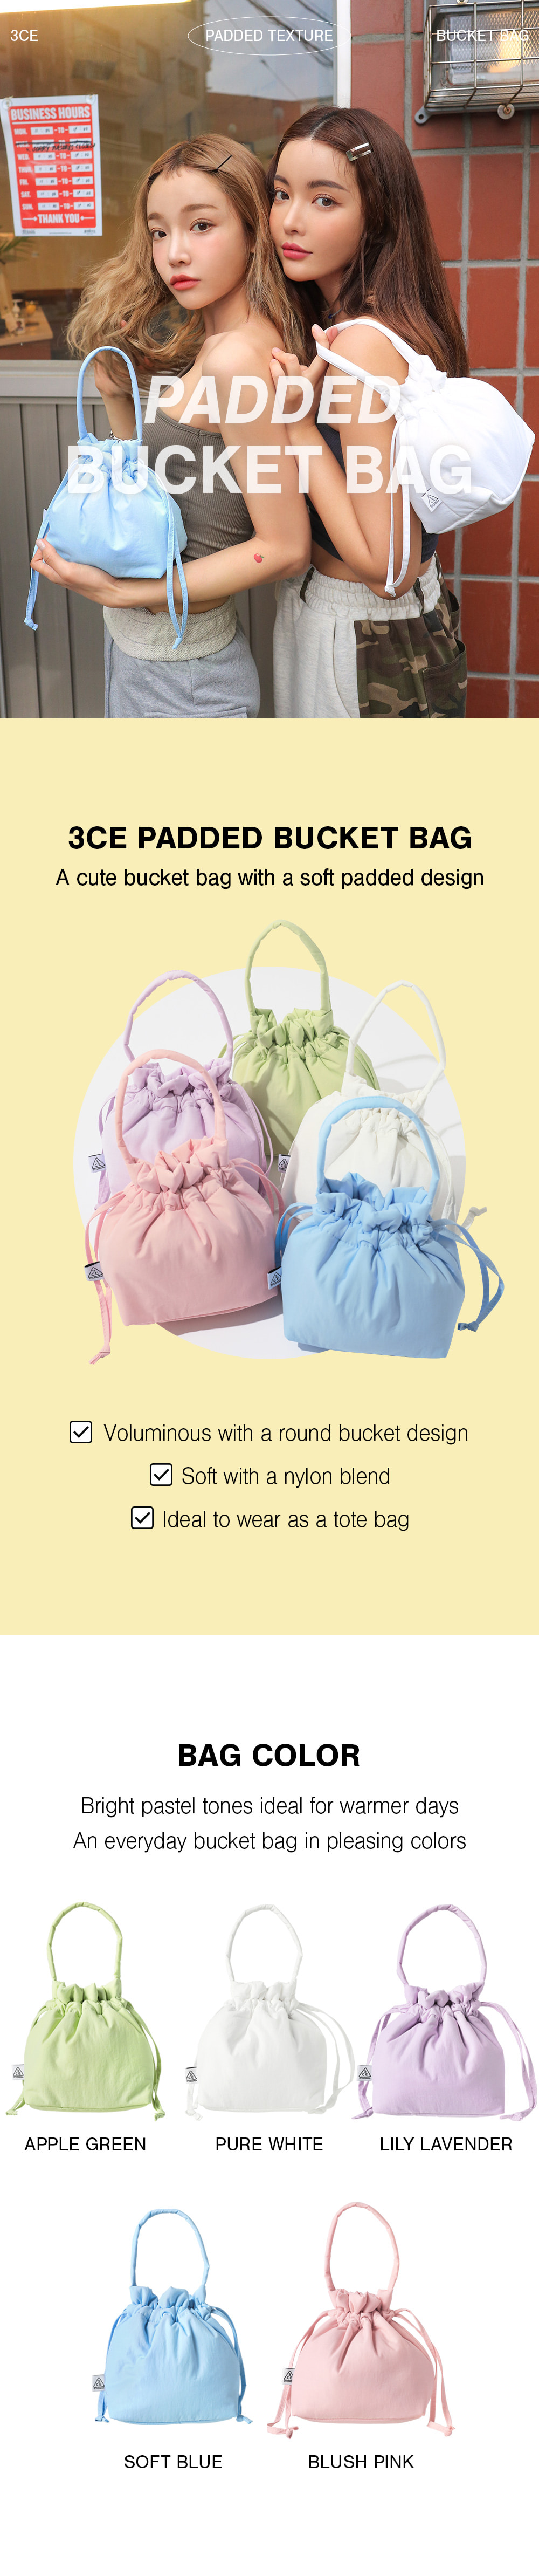 3CE Padded Bucket Bag 1ea  Best Price and Fast Shipping from Beauty Box  Korea